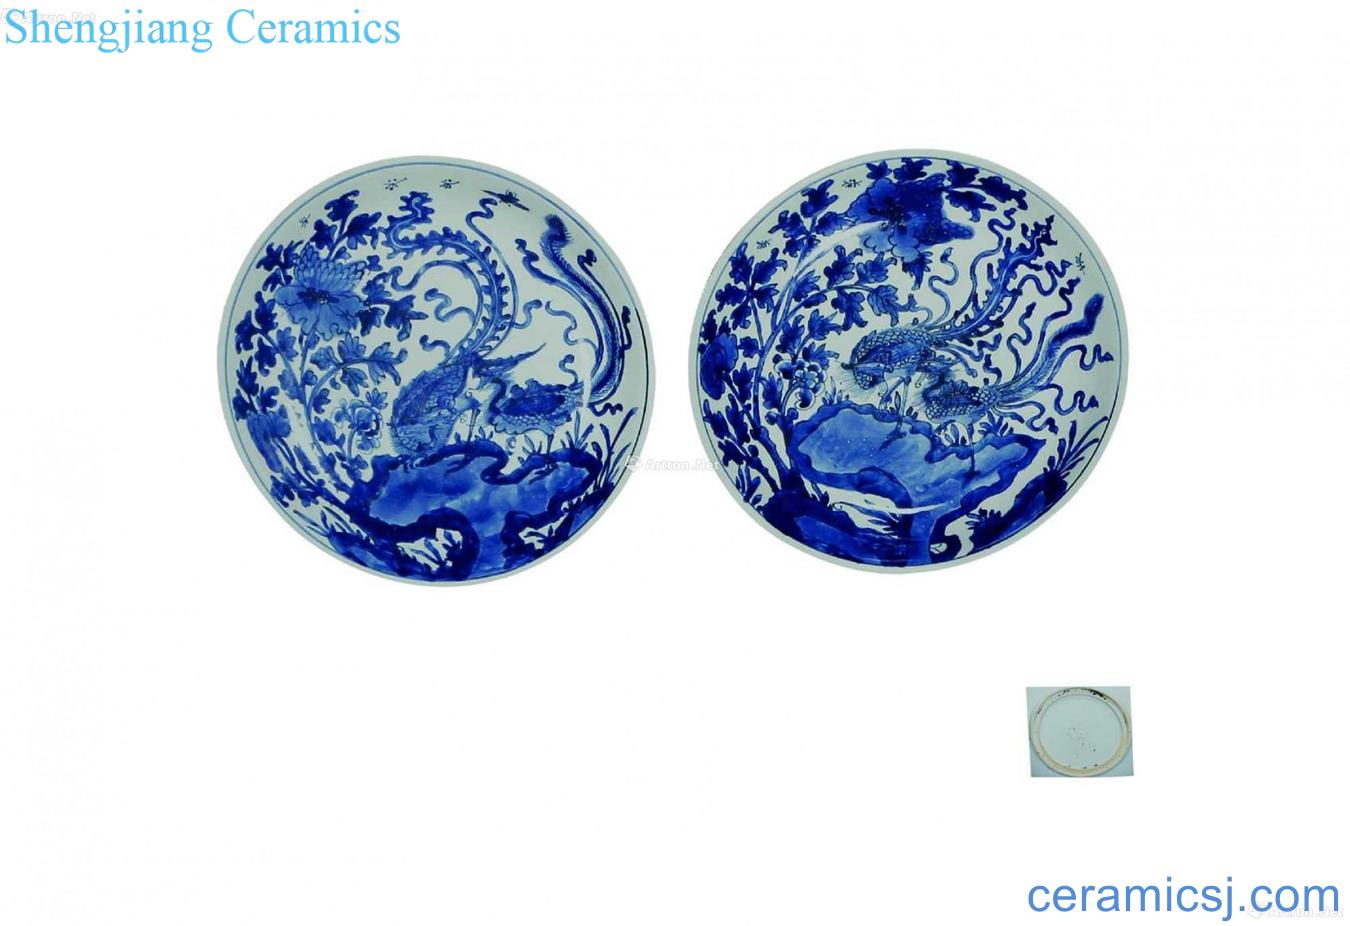 Blue and white wear peony fung plate of a couple